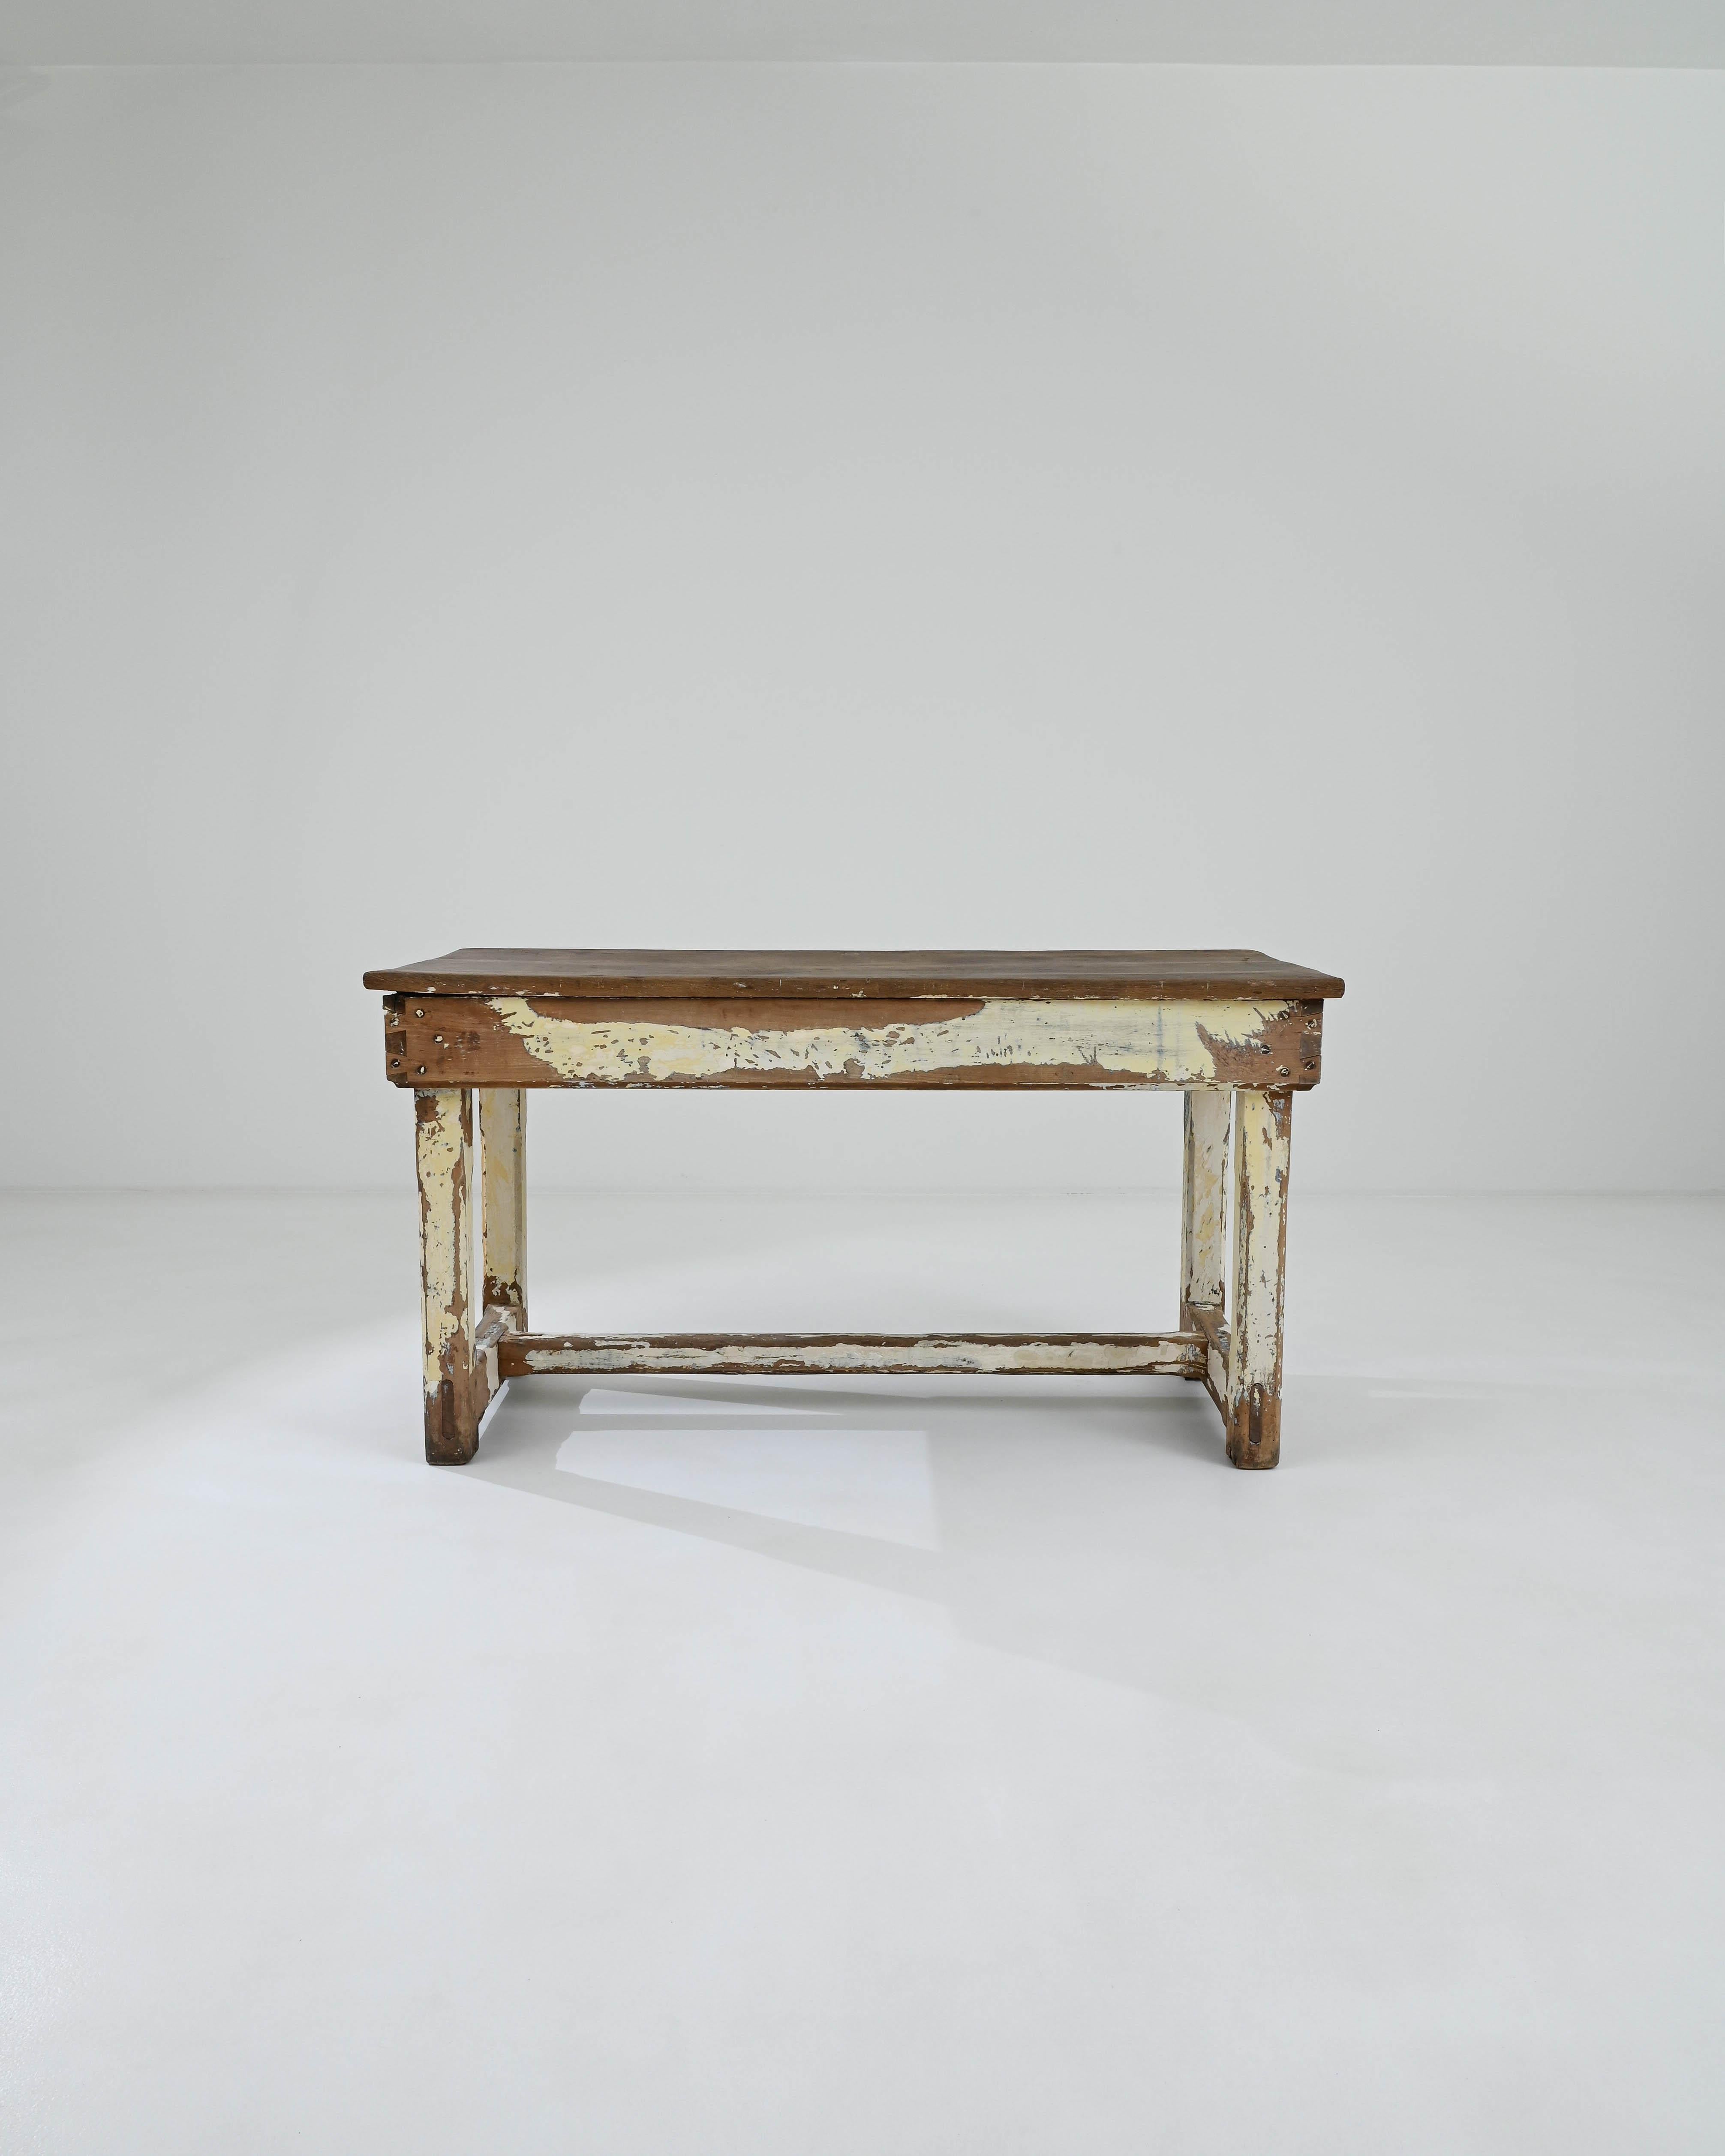 A charming support for all forms of domestic work, this wooden table originated from France, circa 1900. Time-touched and dramatically aged, this classic table radiates a cozy allure, and invites one to examine its fascinating details. Thick legs,